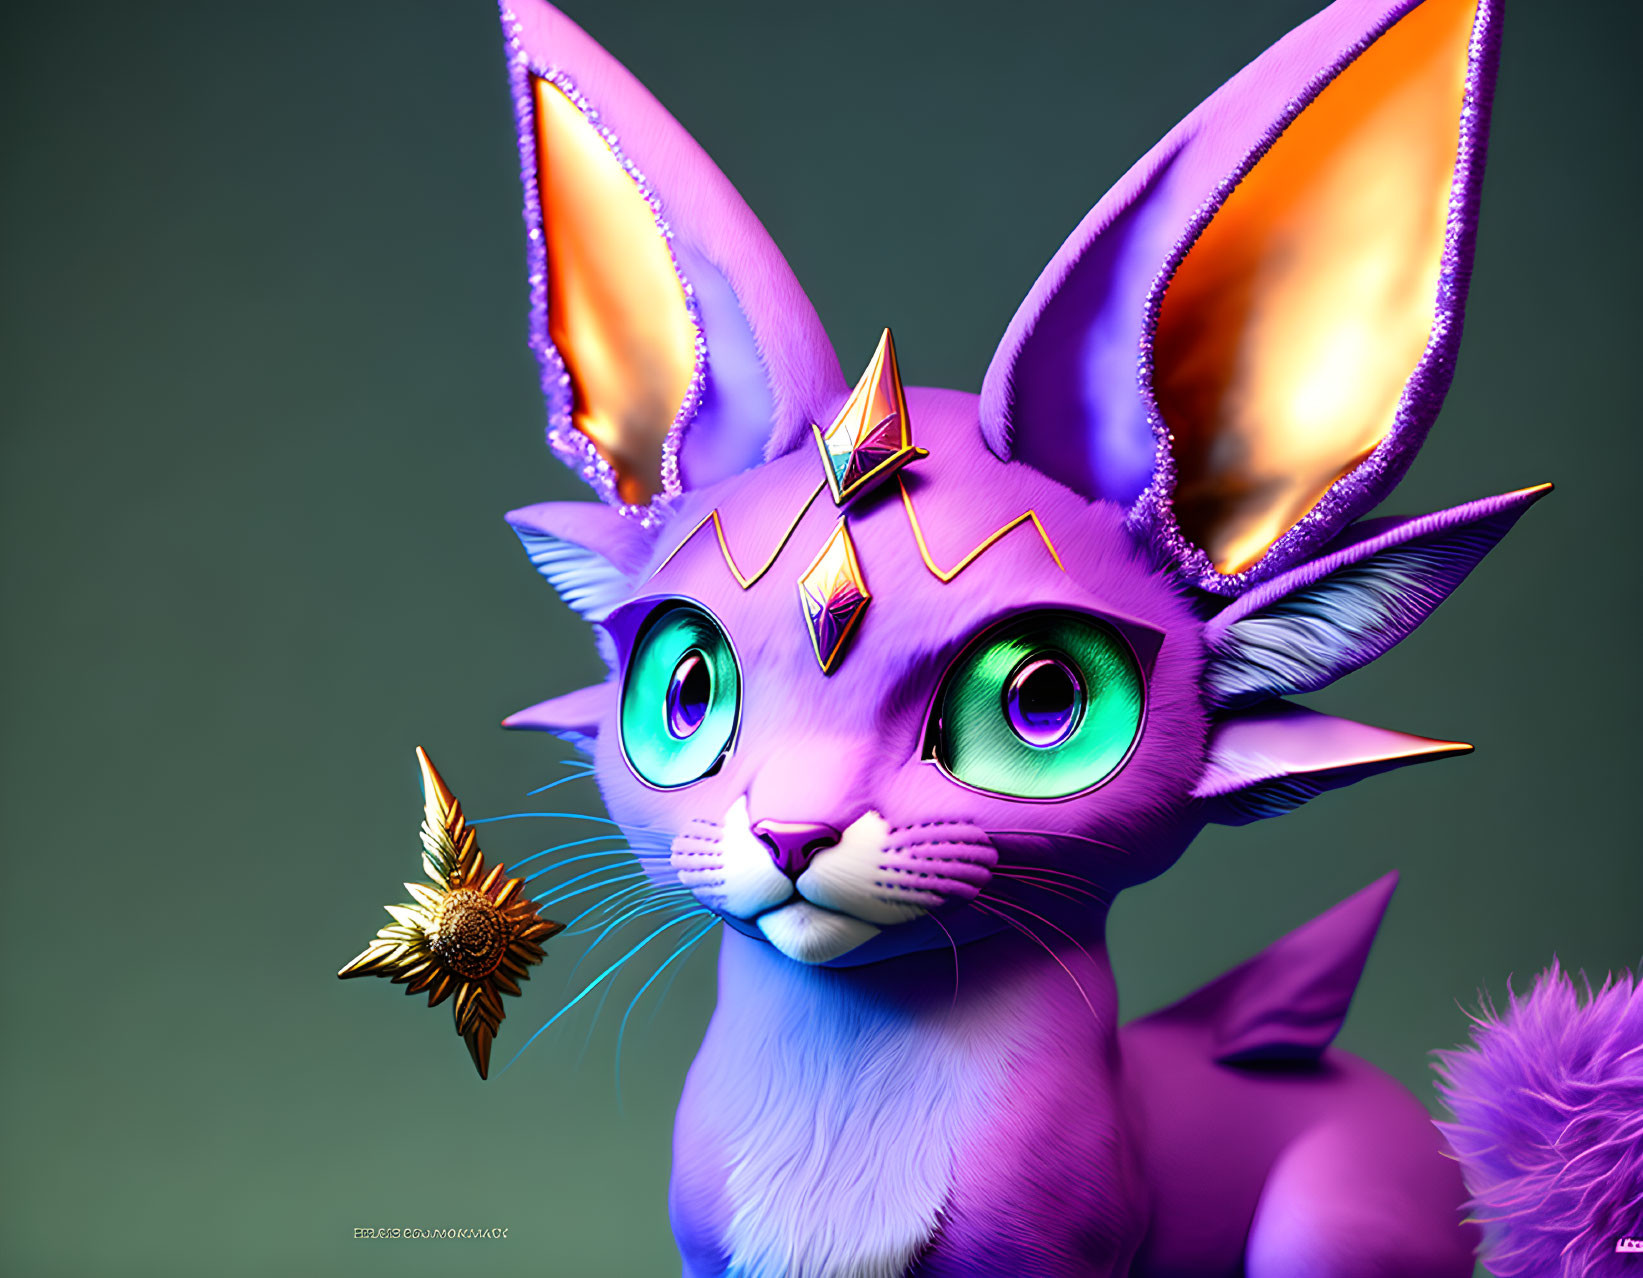 Colorful Fantasy Cat Artwork with Oversized Ears and Green Eyes